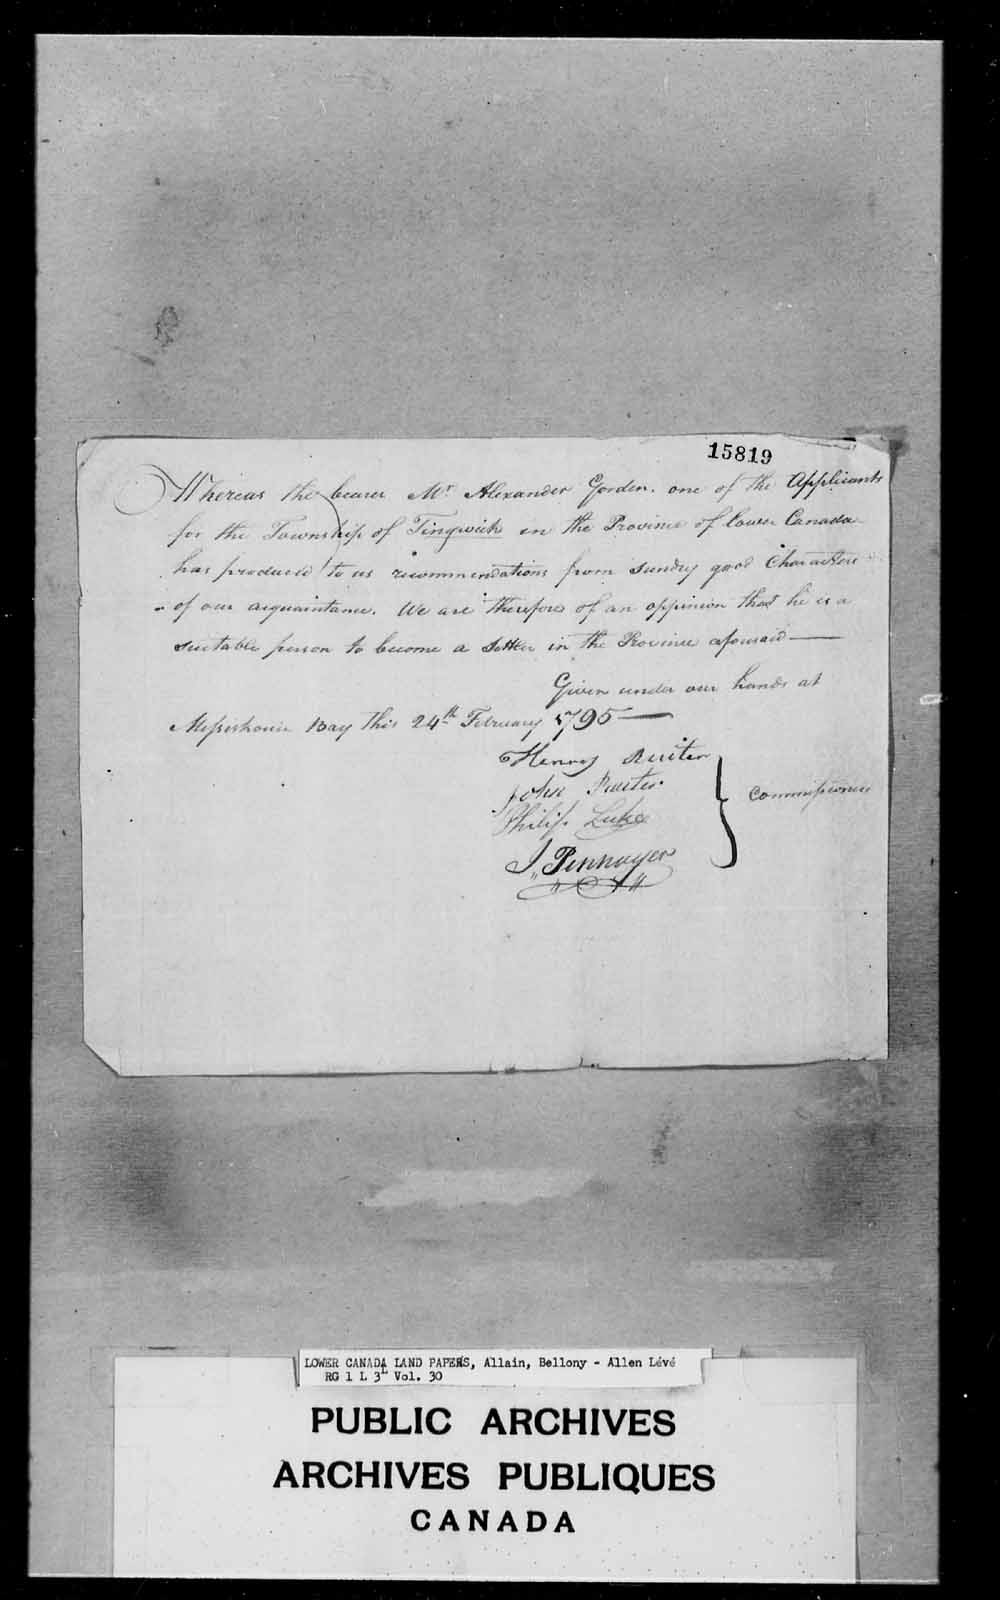 Digitized page of  for Image No.: e003702649